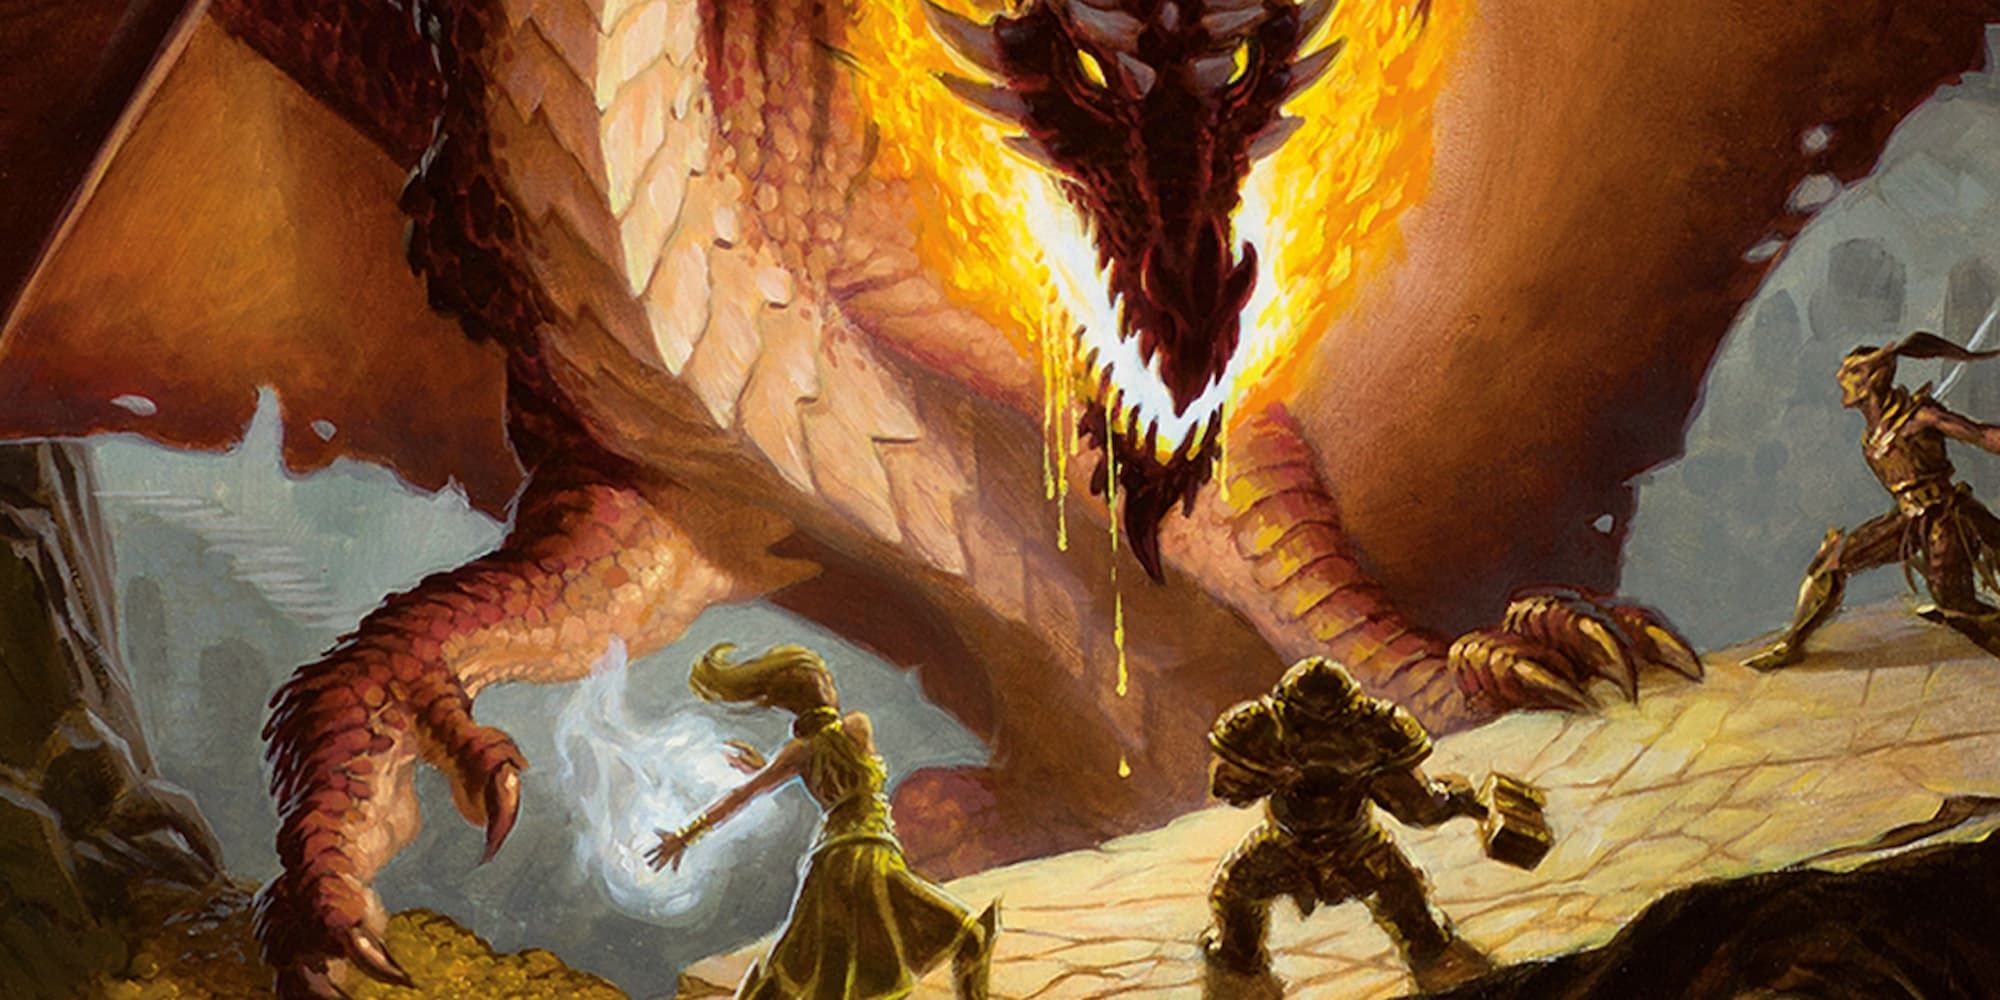 A group of D&D adventurers fighting a dragon which is about to breathe fire